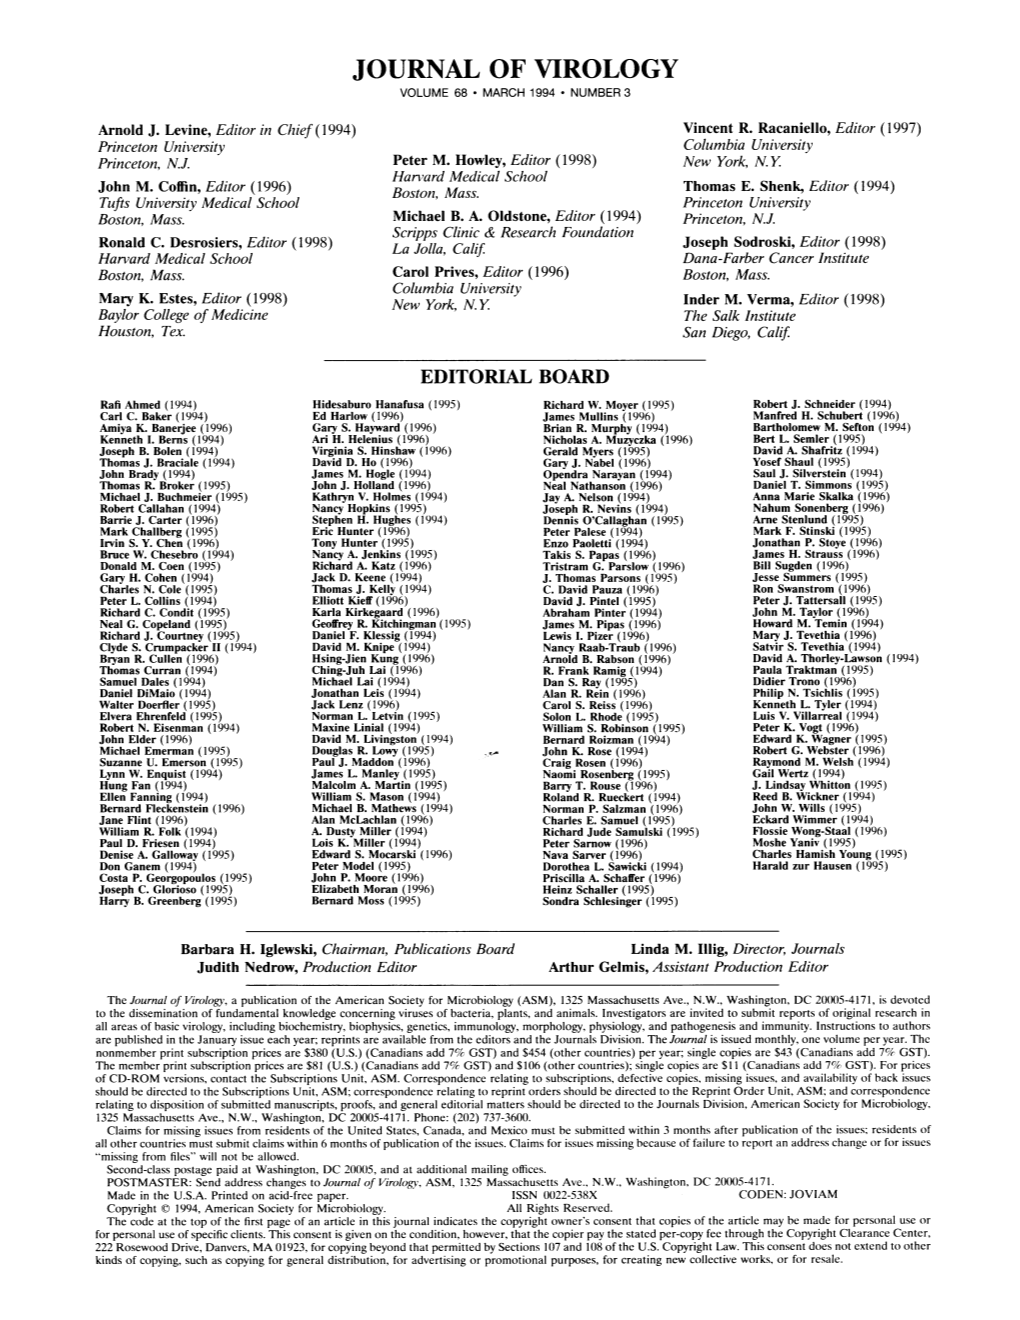 Journal of Virology Volume 68 * March 1994 * Number 3